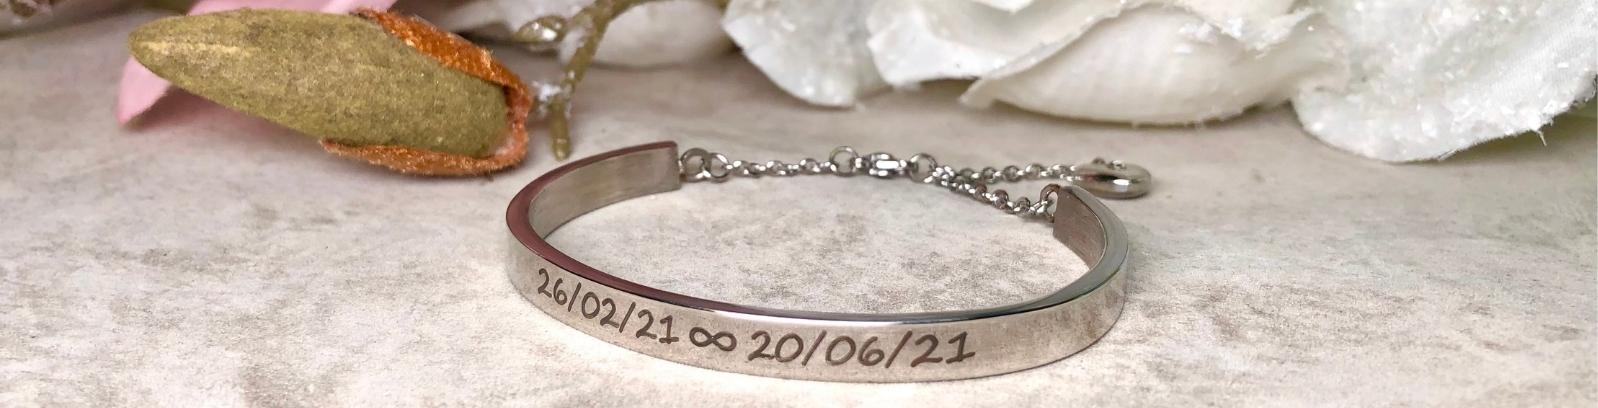 Women's jewelry with engraving